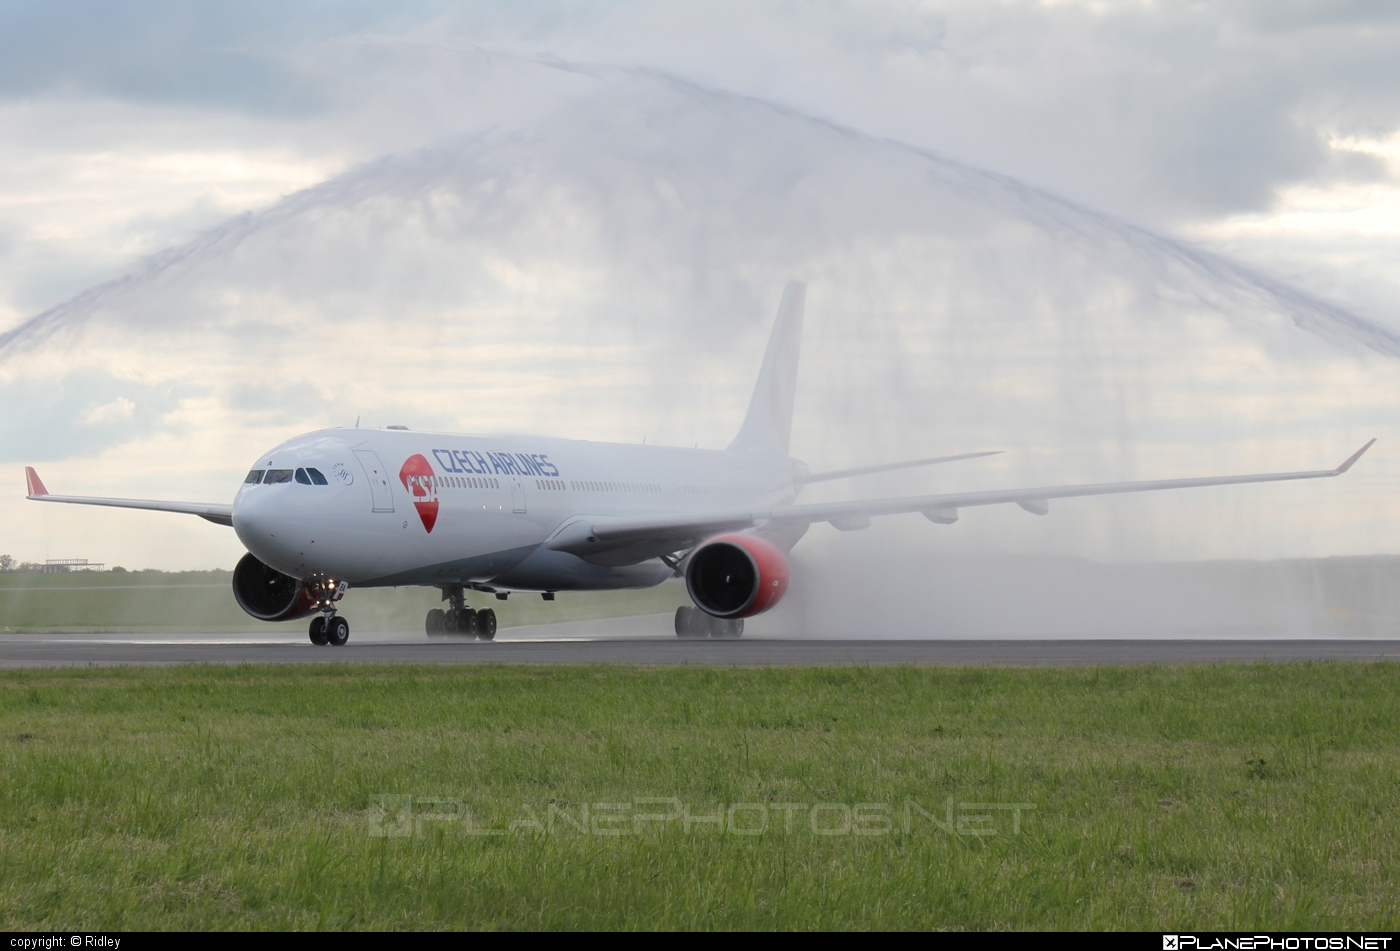 Airbus A330-323X - OK-YBA operated by CSA Czech Airlines #a330 #a330family #airbus #airbus330 #csa #czechairlines